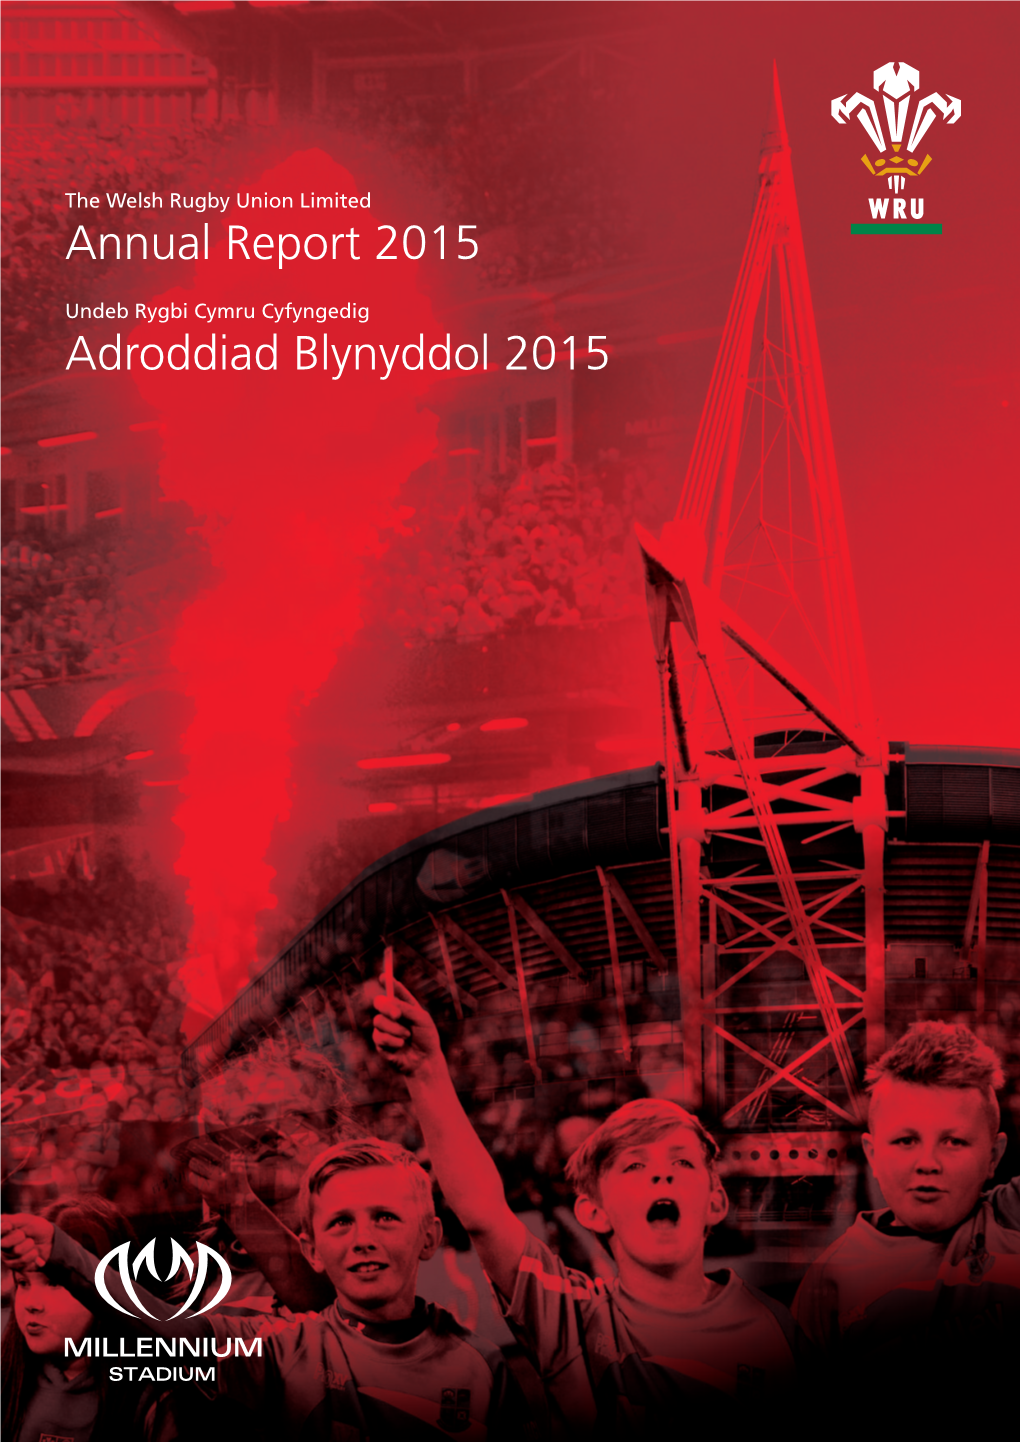 The Welsh Rugby Union Limited Annual Report 2015